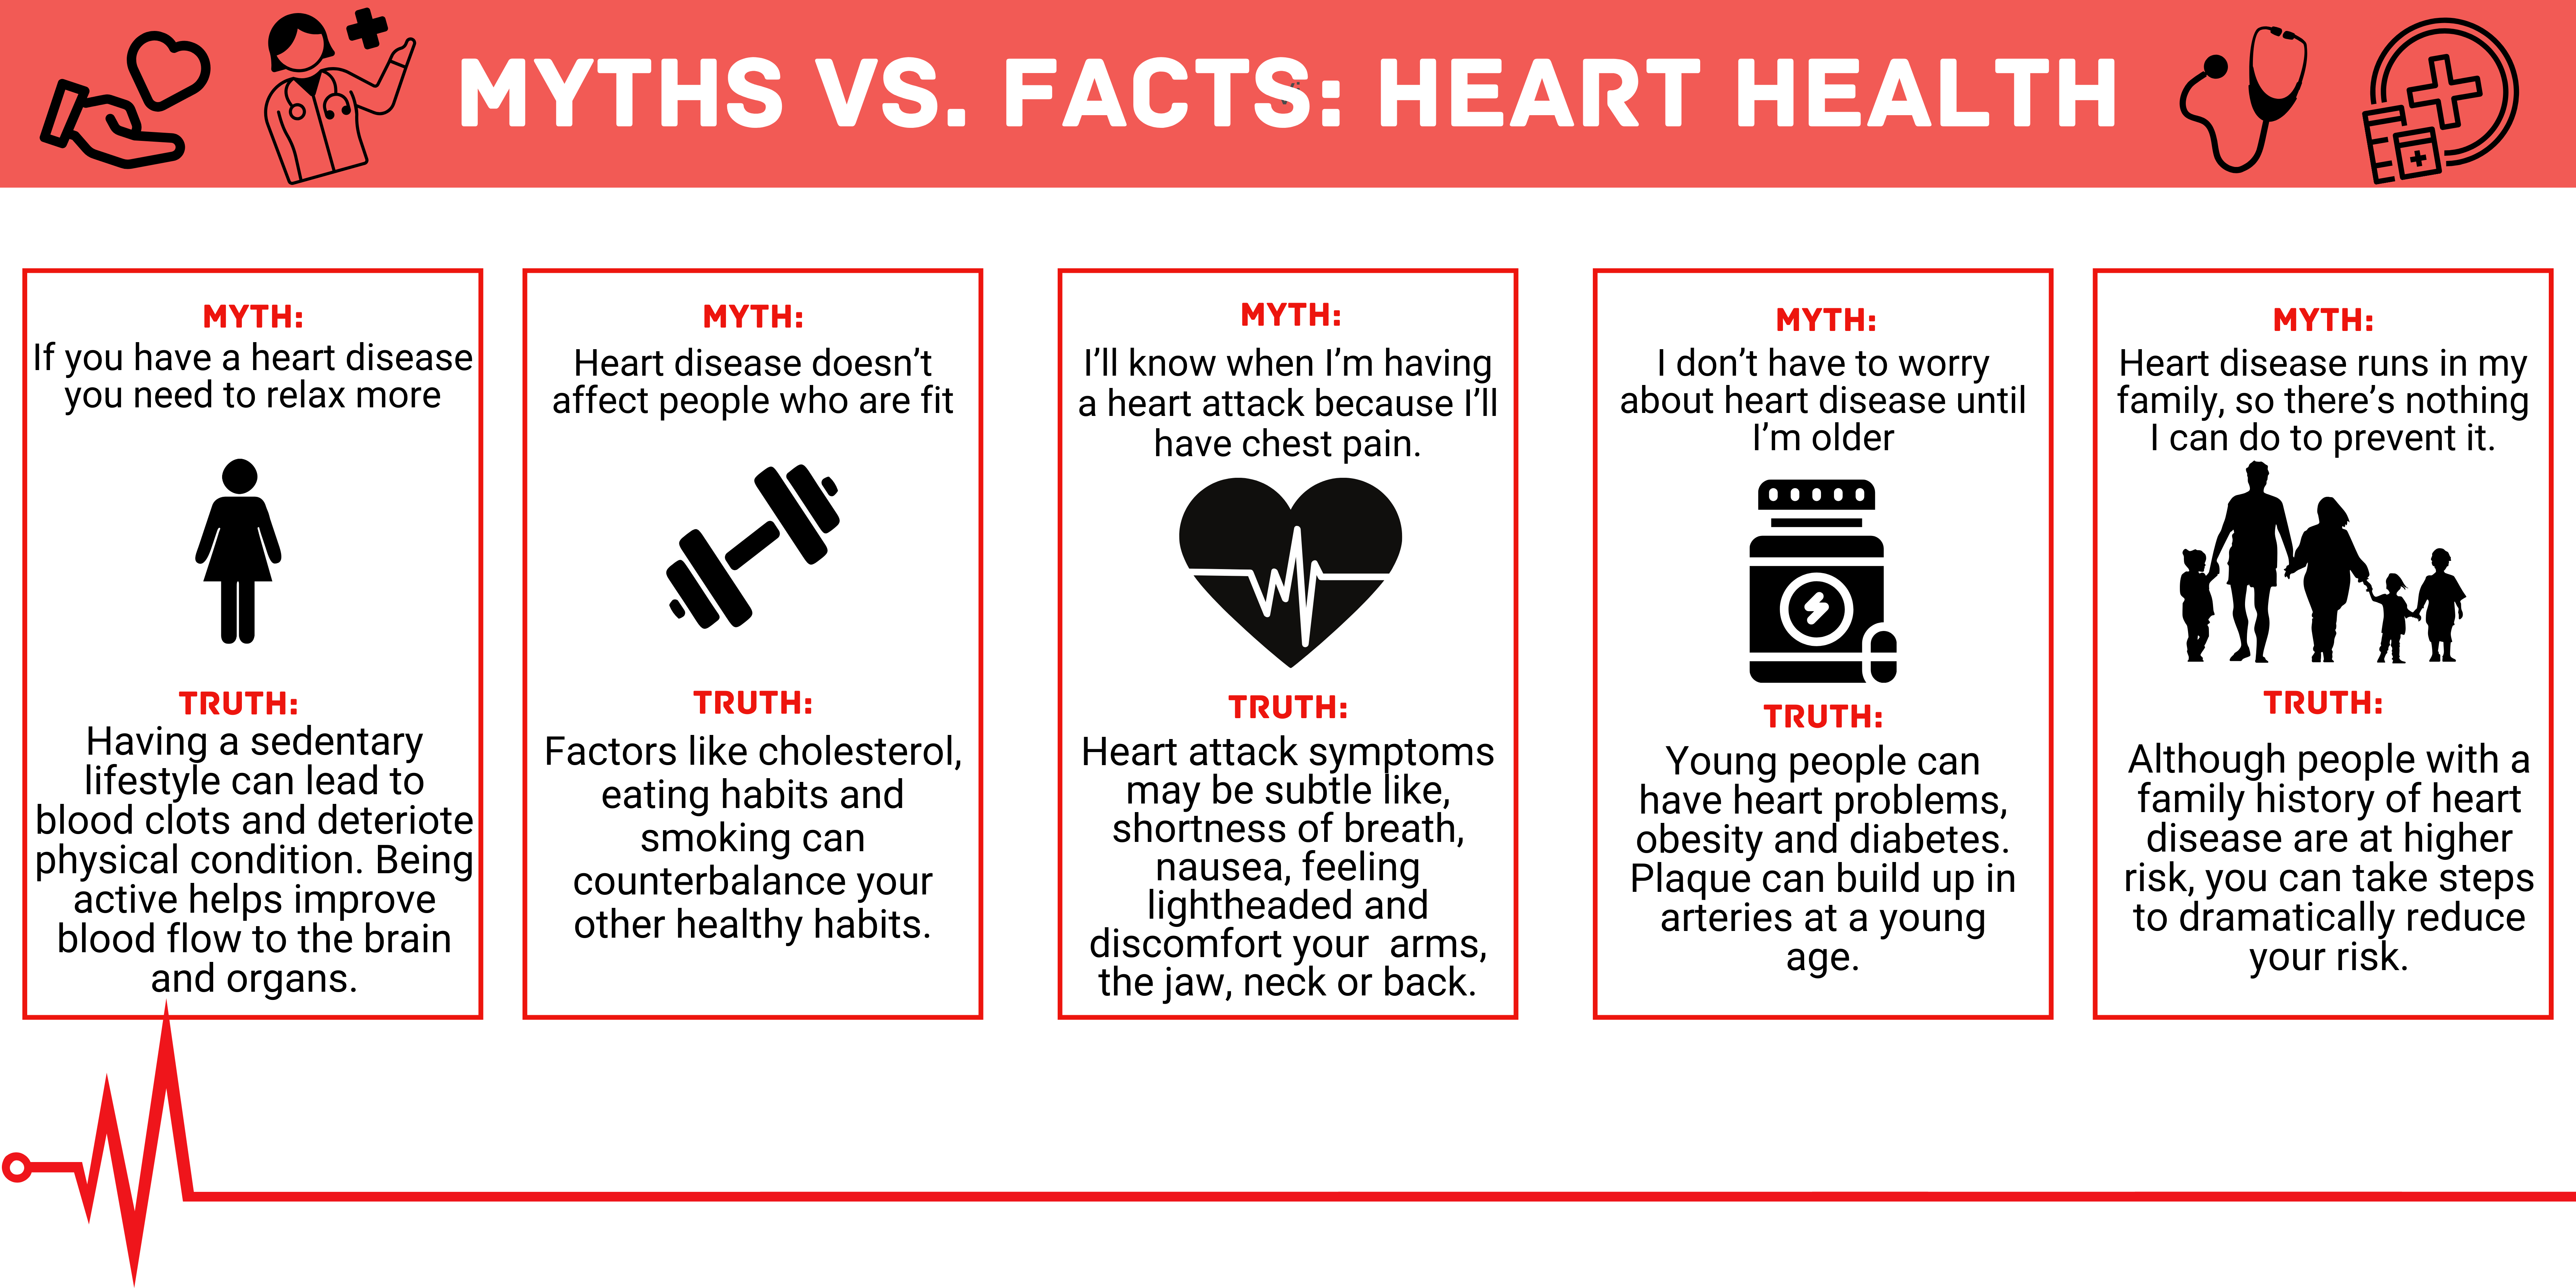 Facts VS. Myths Infographic.png